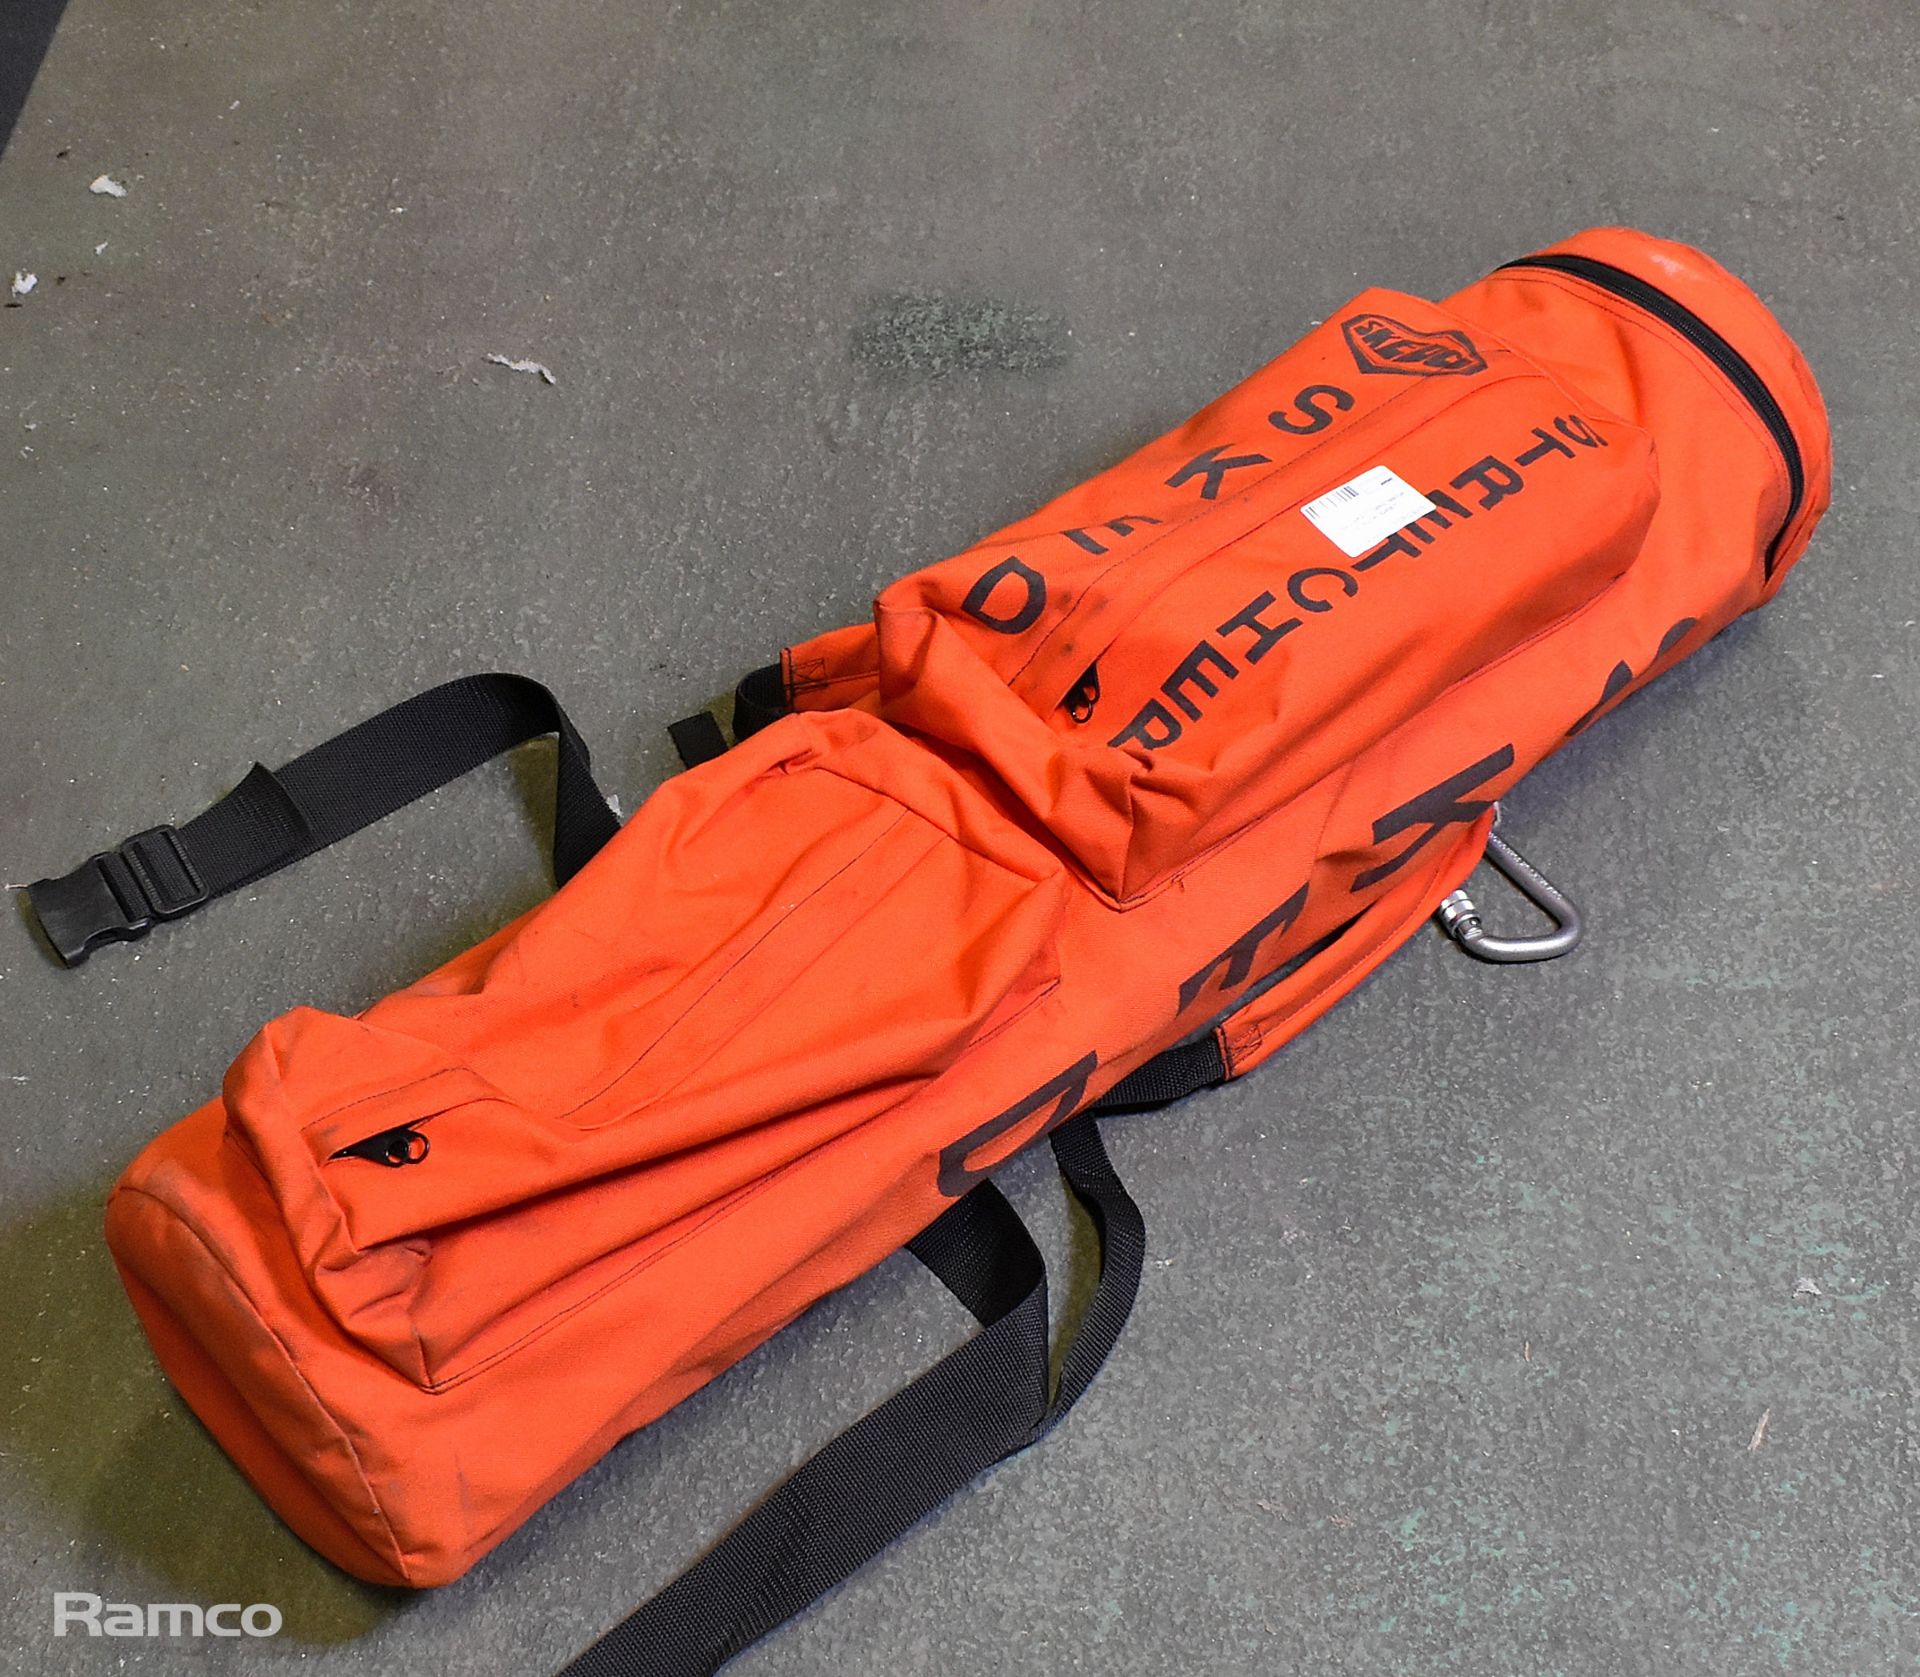 4x Sked SK200 basic rescue stretcher systems, Sked basic rescue stretcher system - Image 2 of 7